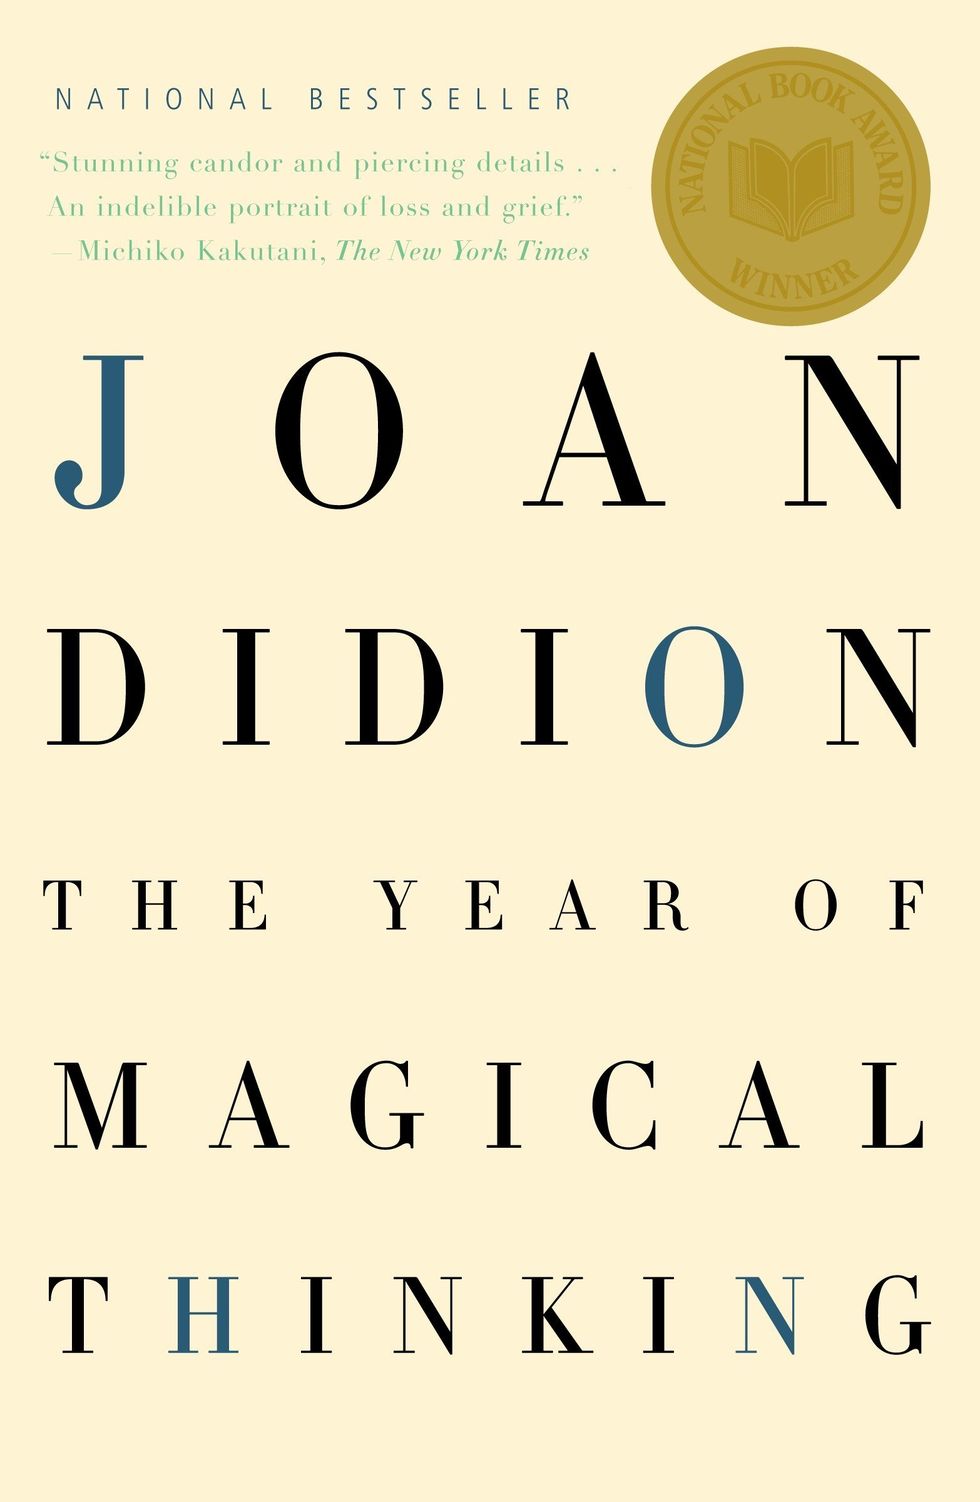 The Year of Magical Thinking by Joan Didion (2005)